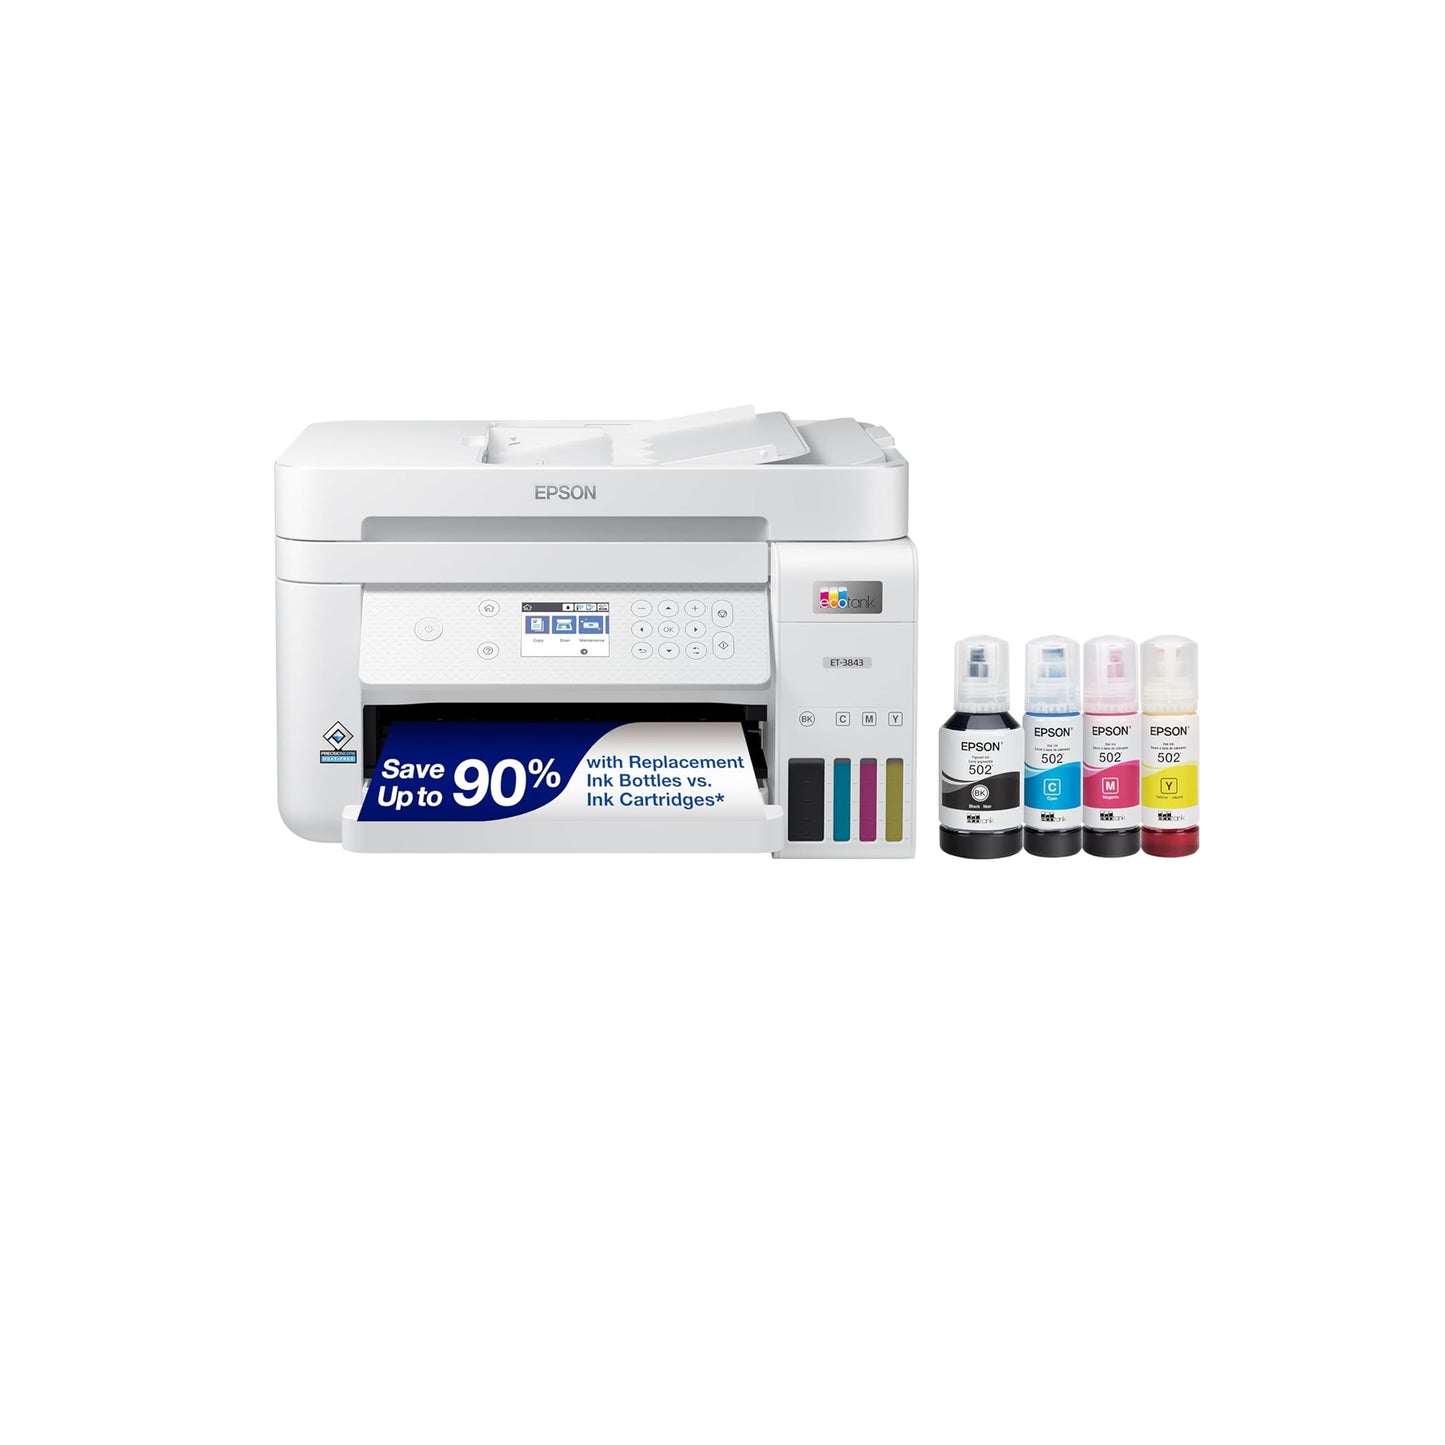 Epson EcoTank ET-3843 Wireless Color All-in-One Cartridge-Free Supertank Printer with Scanner, Copier, ADF and Ethernet-for The Ultimate Home Office, White